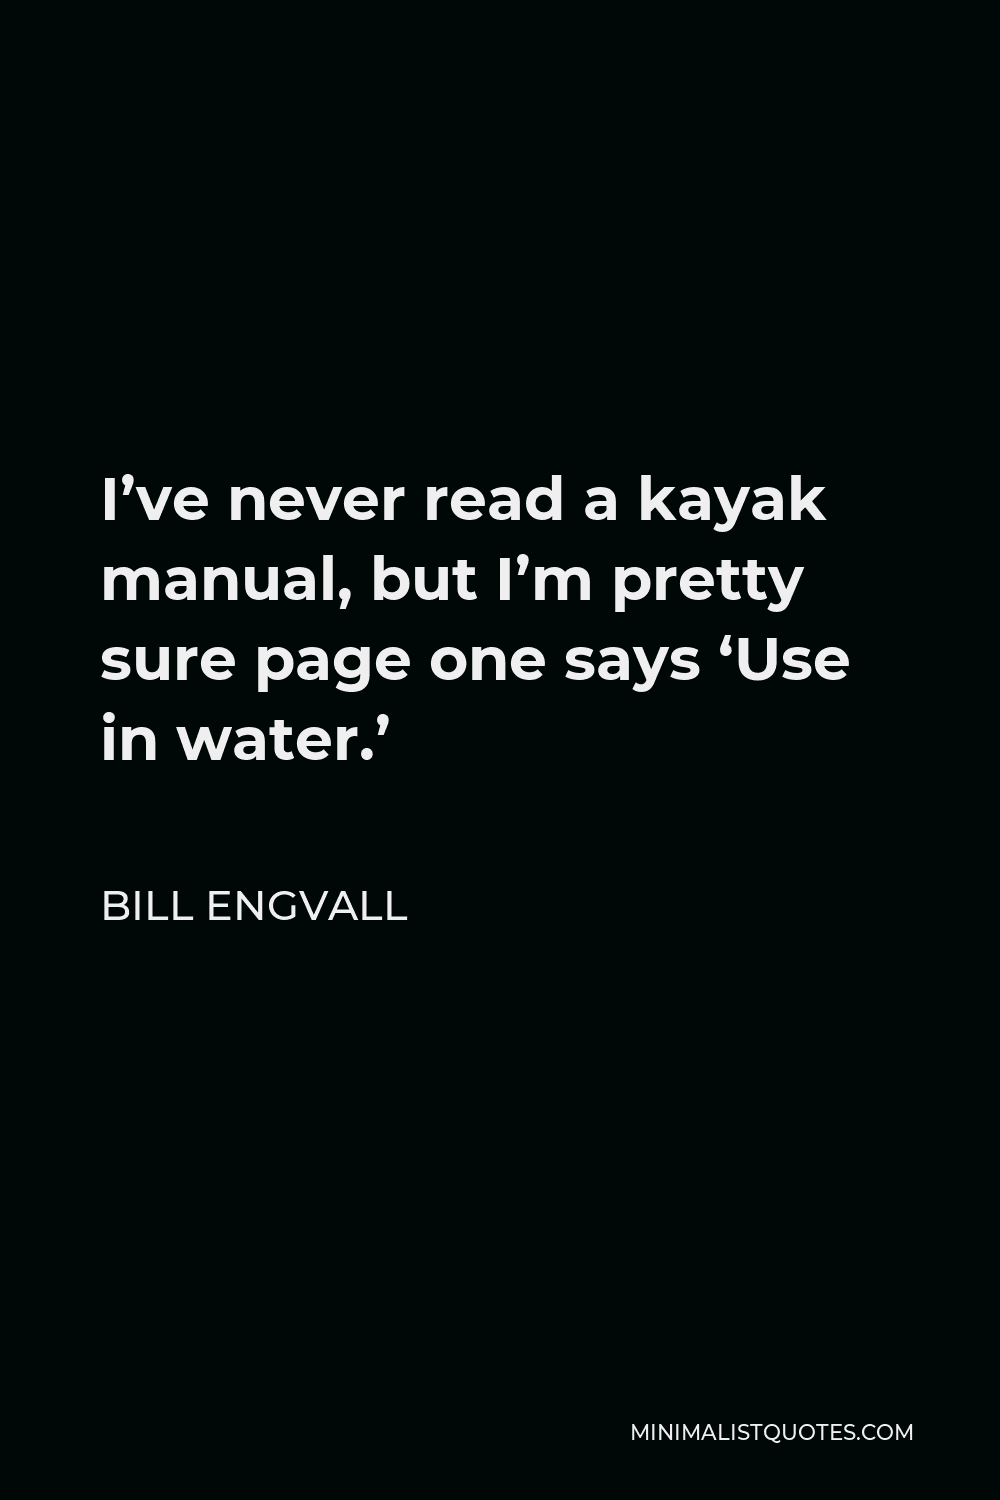 Bill Engvall Quote - I’ve never read a kayak manual, but I’m pretty sure page one says ‘Use in water.’